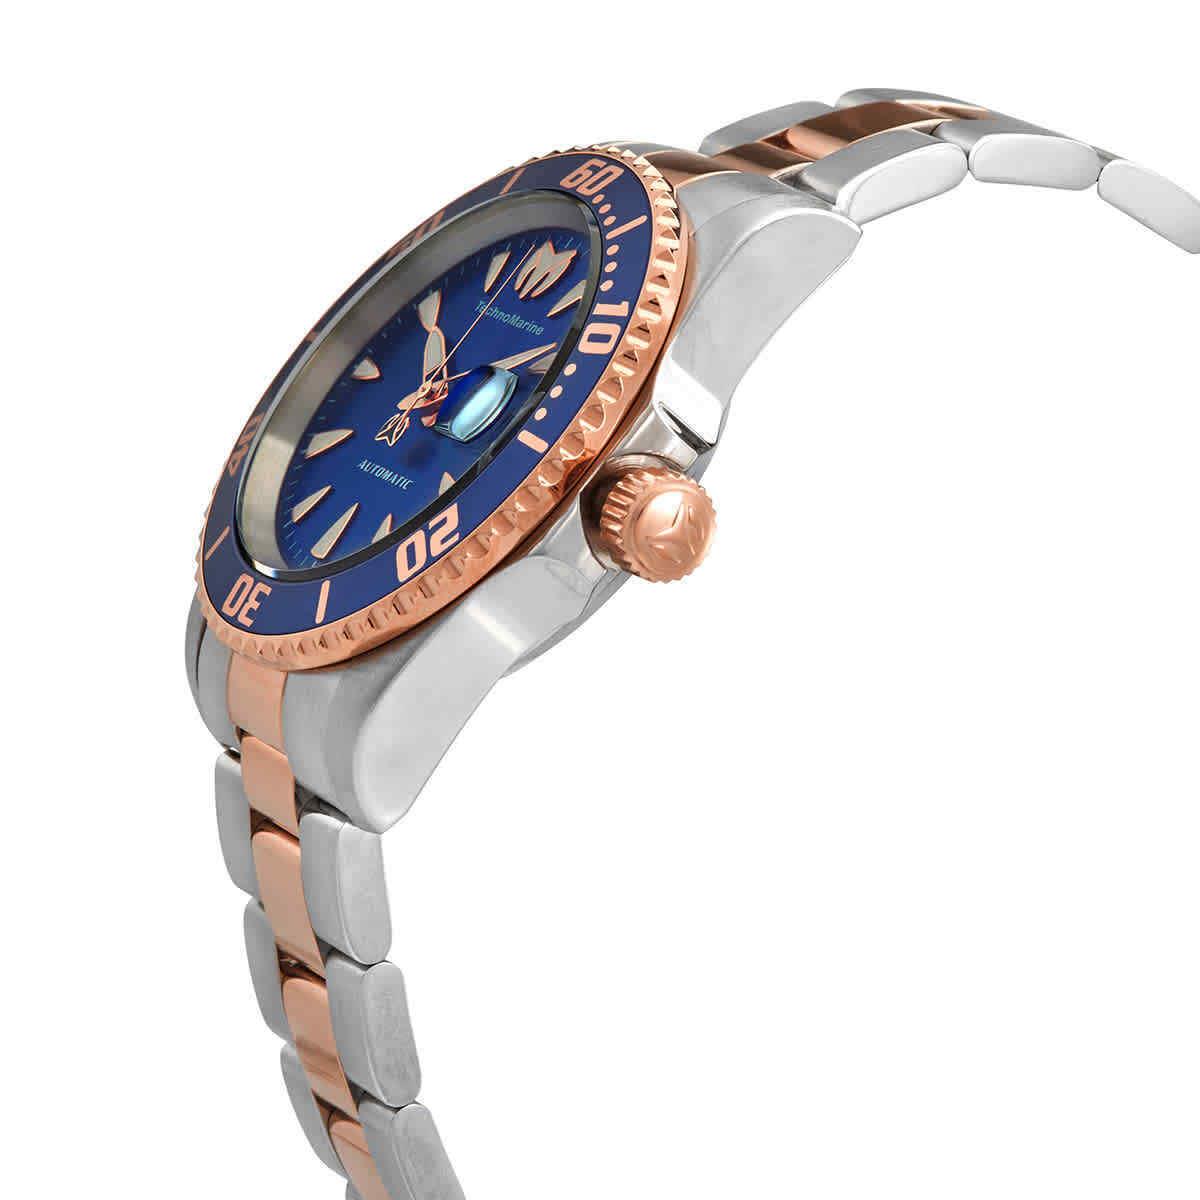 Technomarine Sea Automatic / Manta Collection Blue Dial Men`s Watch TM-219072 - Dial: Blue, Band: Silver, Gold, Bezel: Gold, Blue